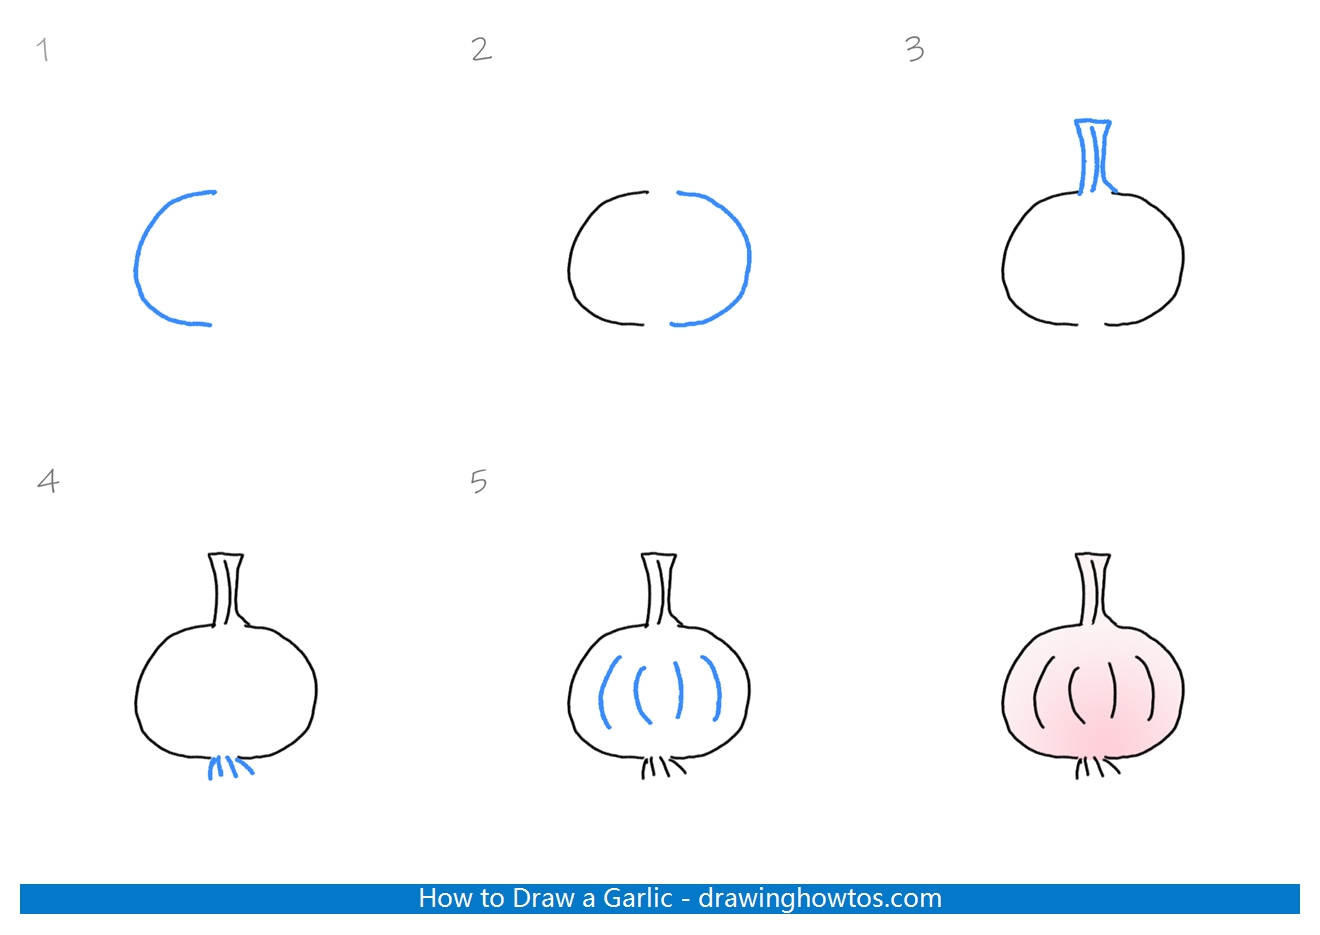 How to Draw a Garlic Step by Step